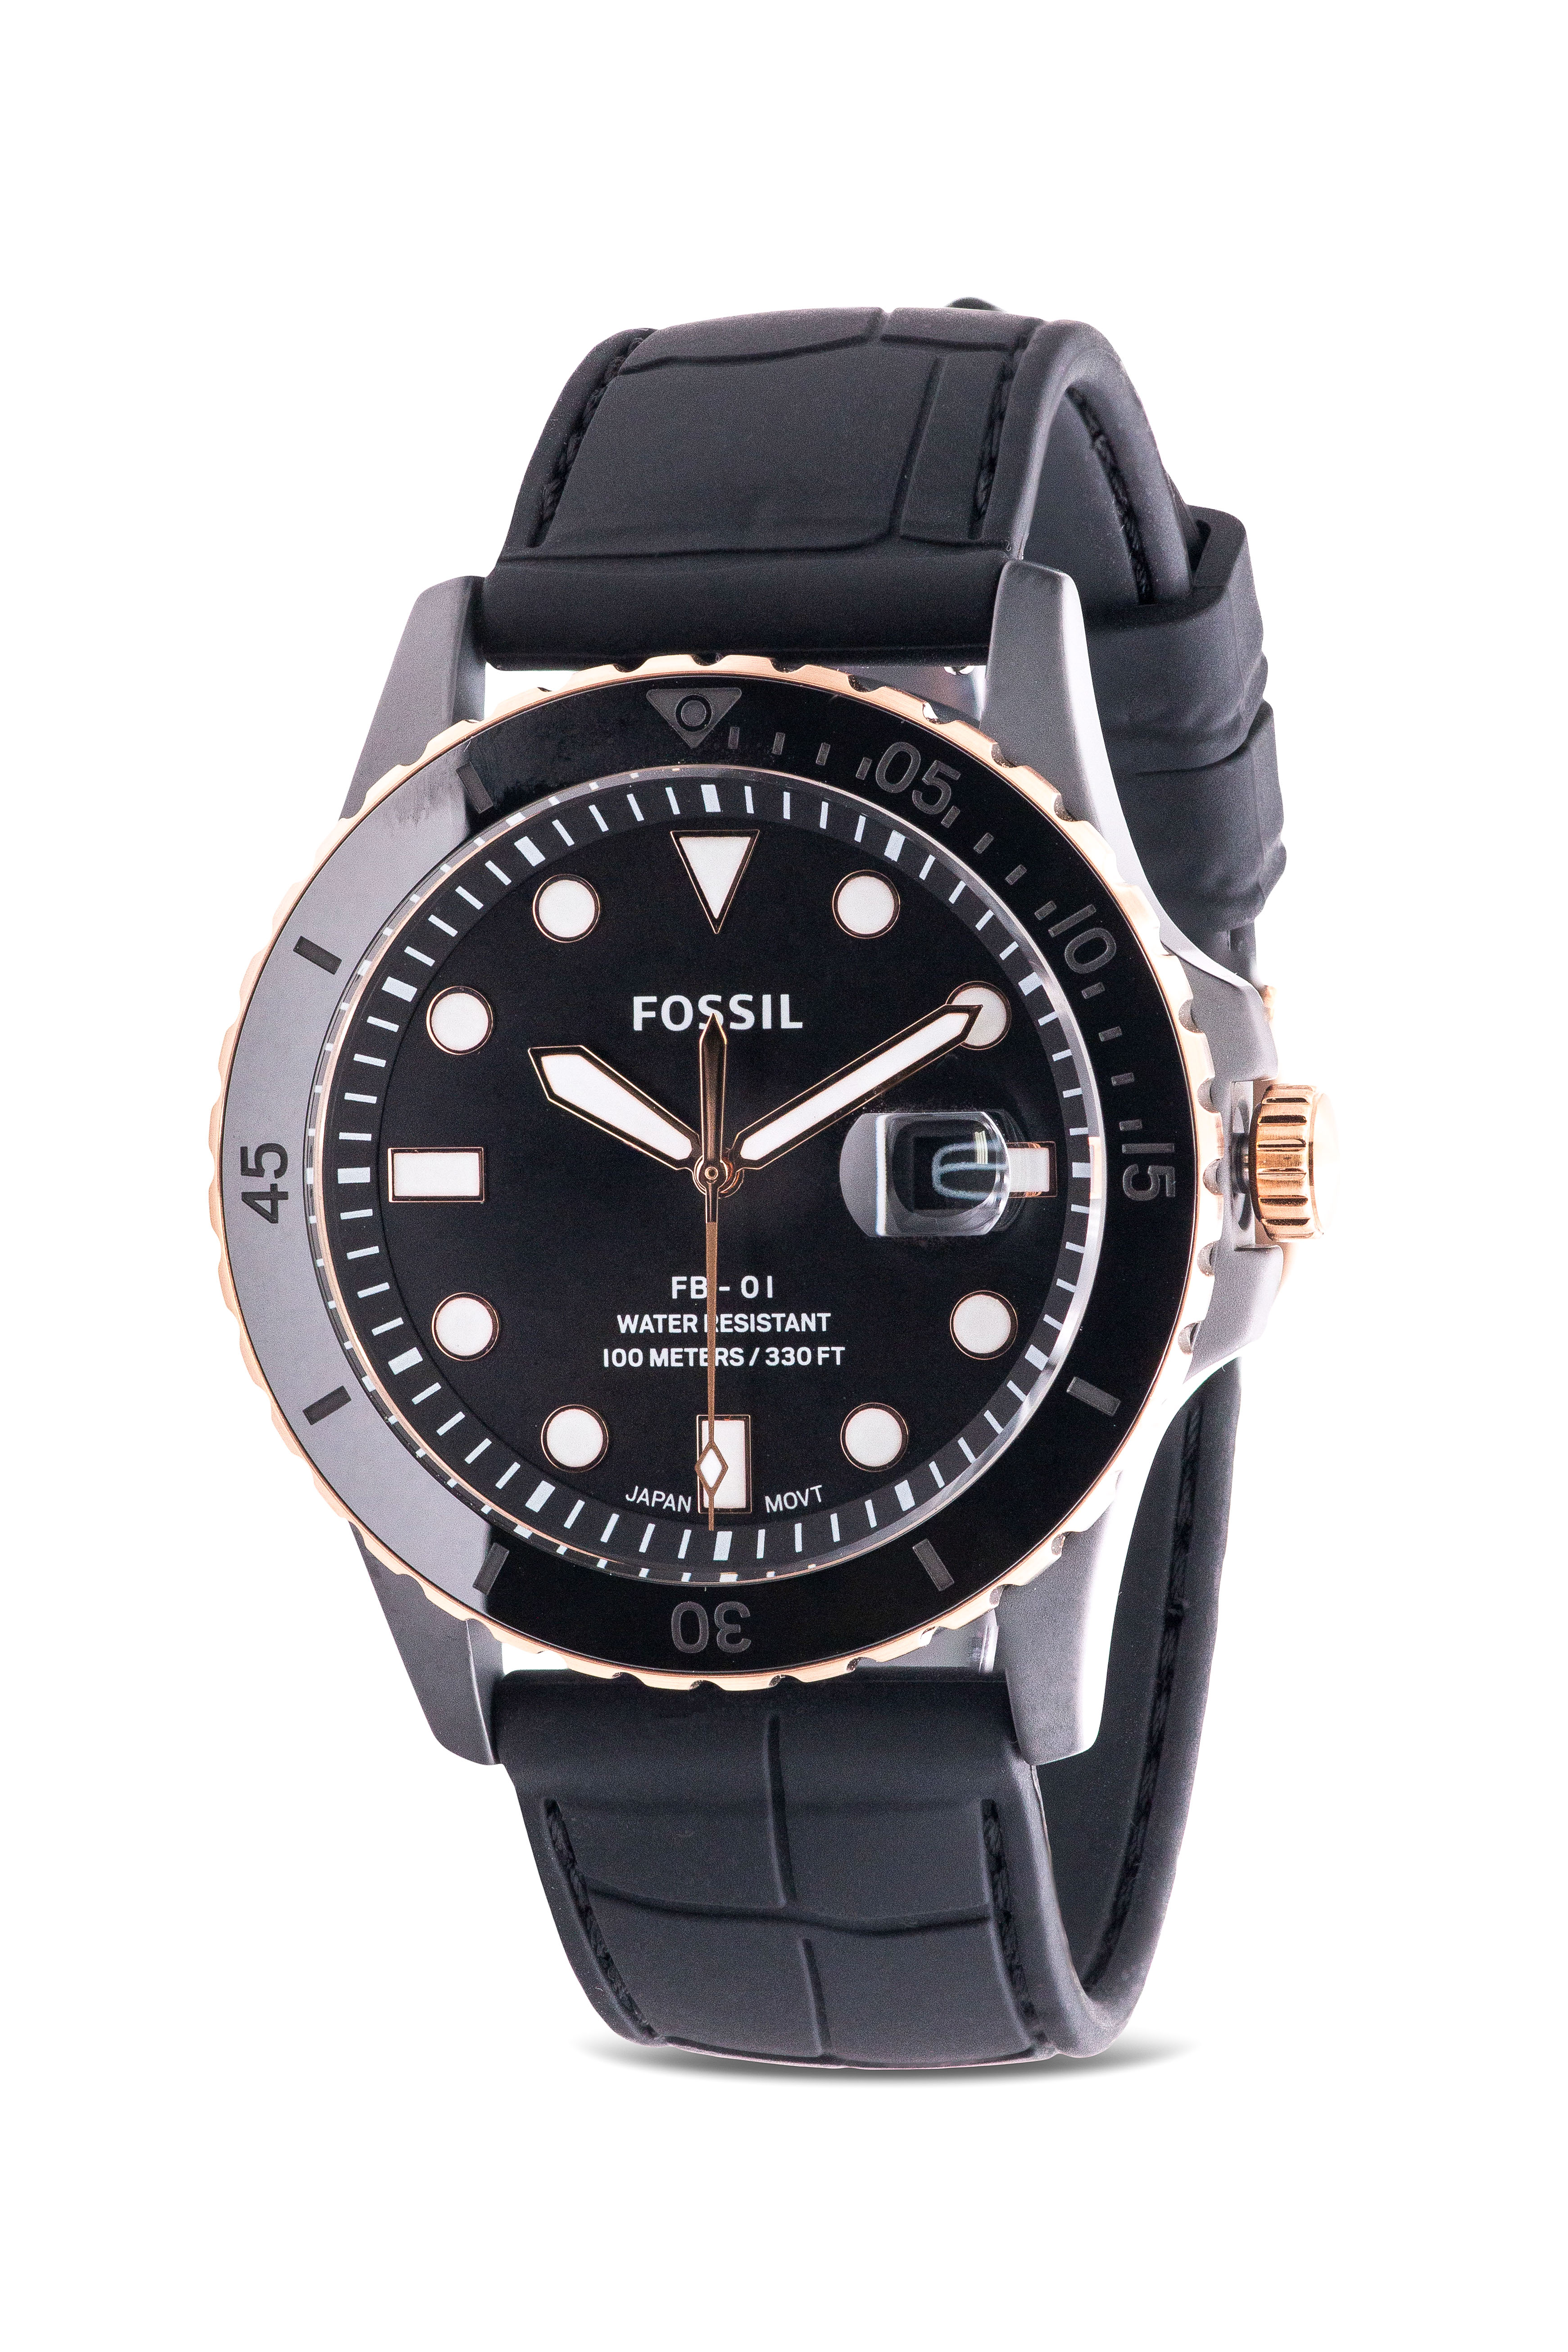 Fossil FB-01 Black Silicone Mens Watch CE5022